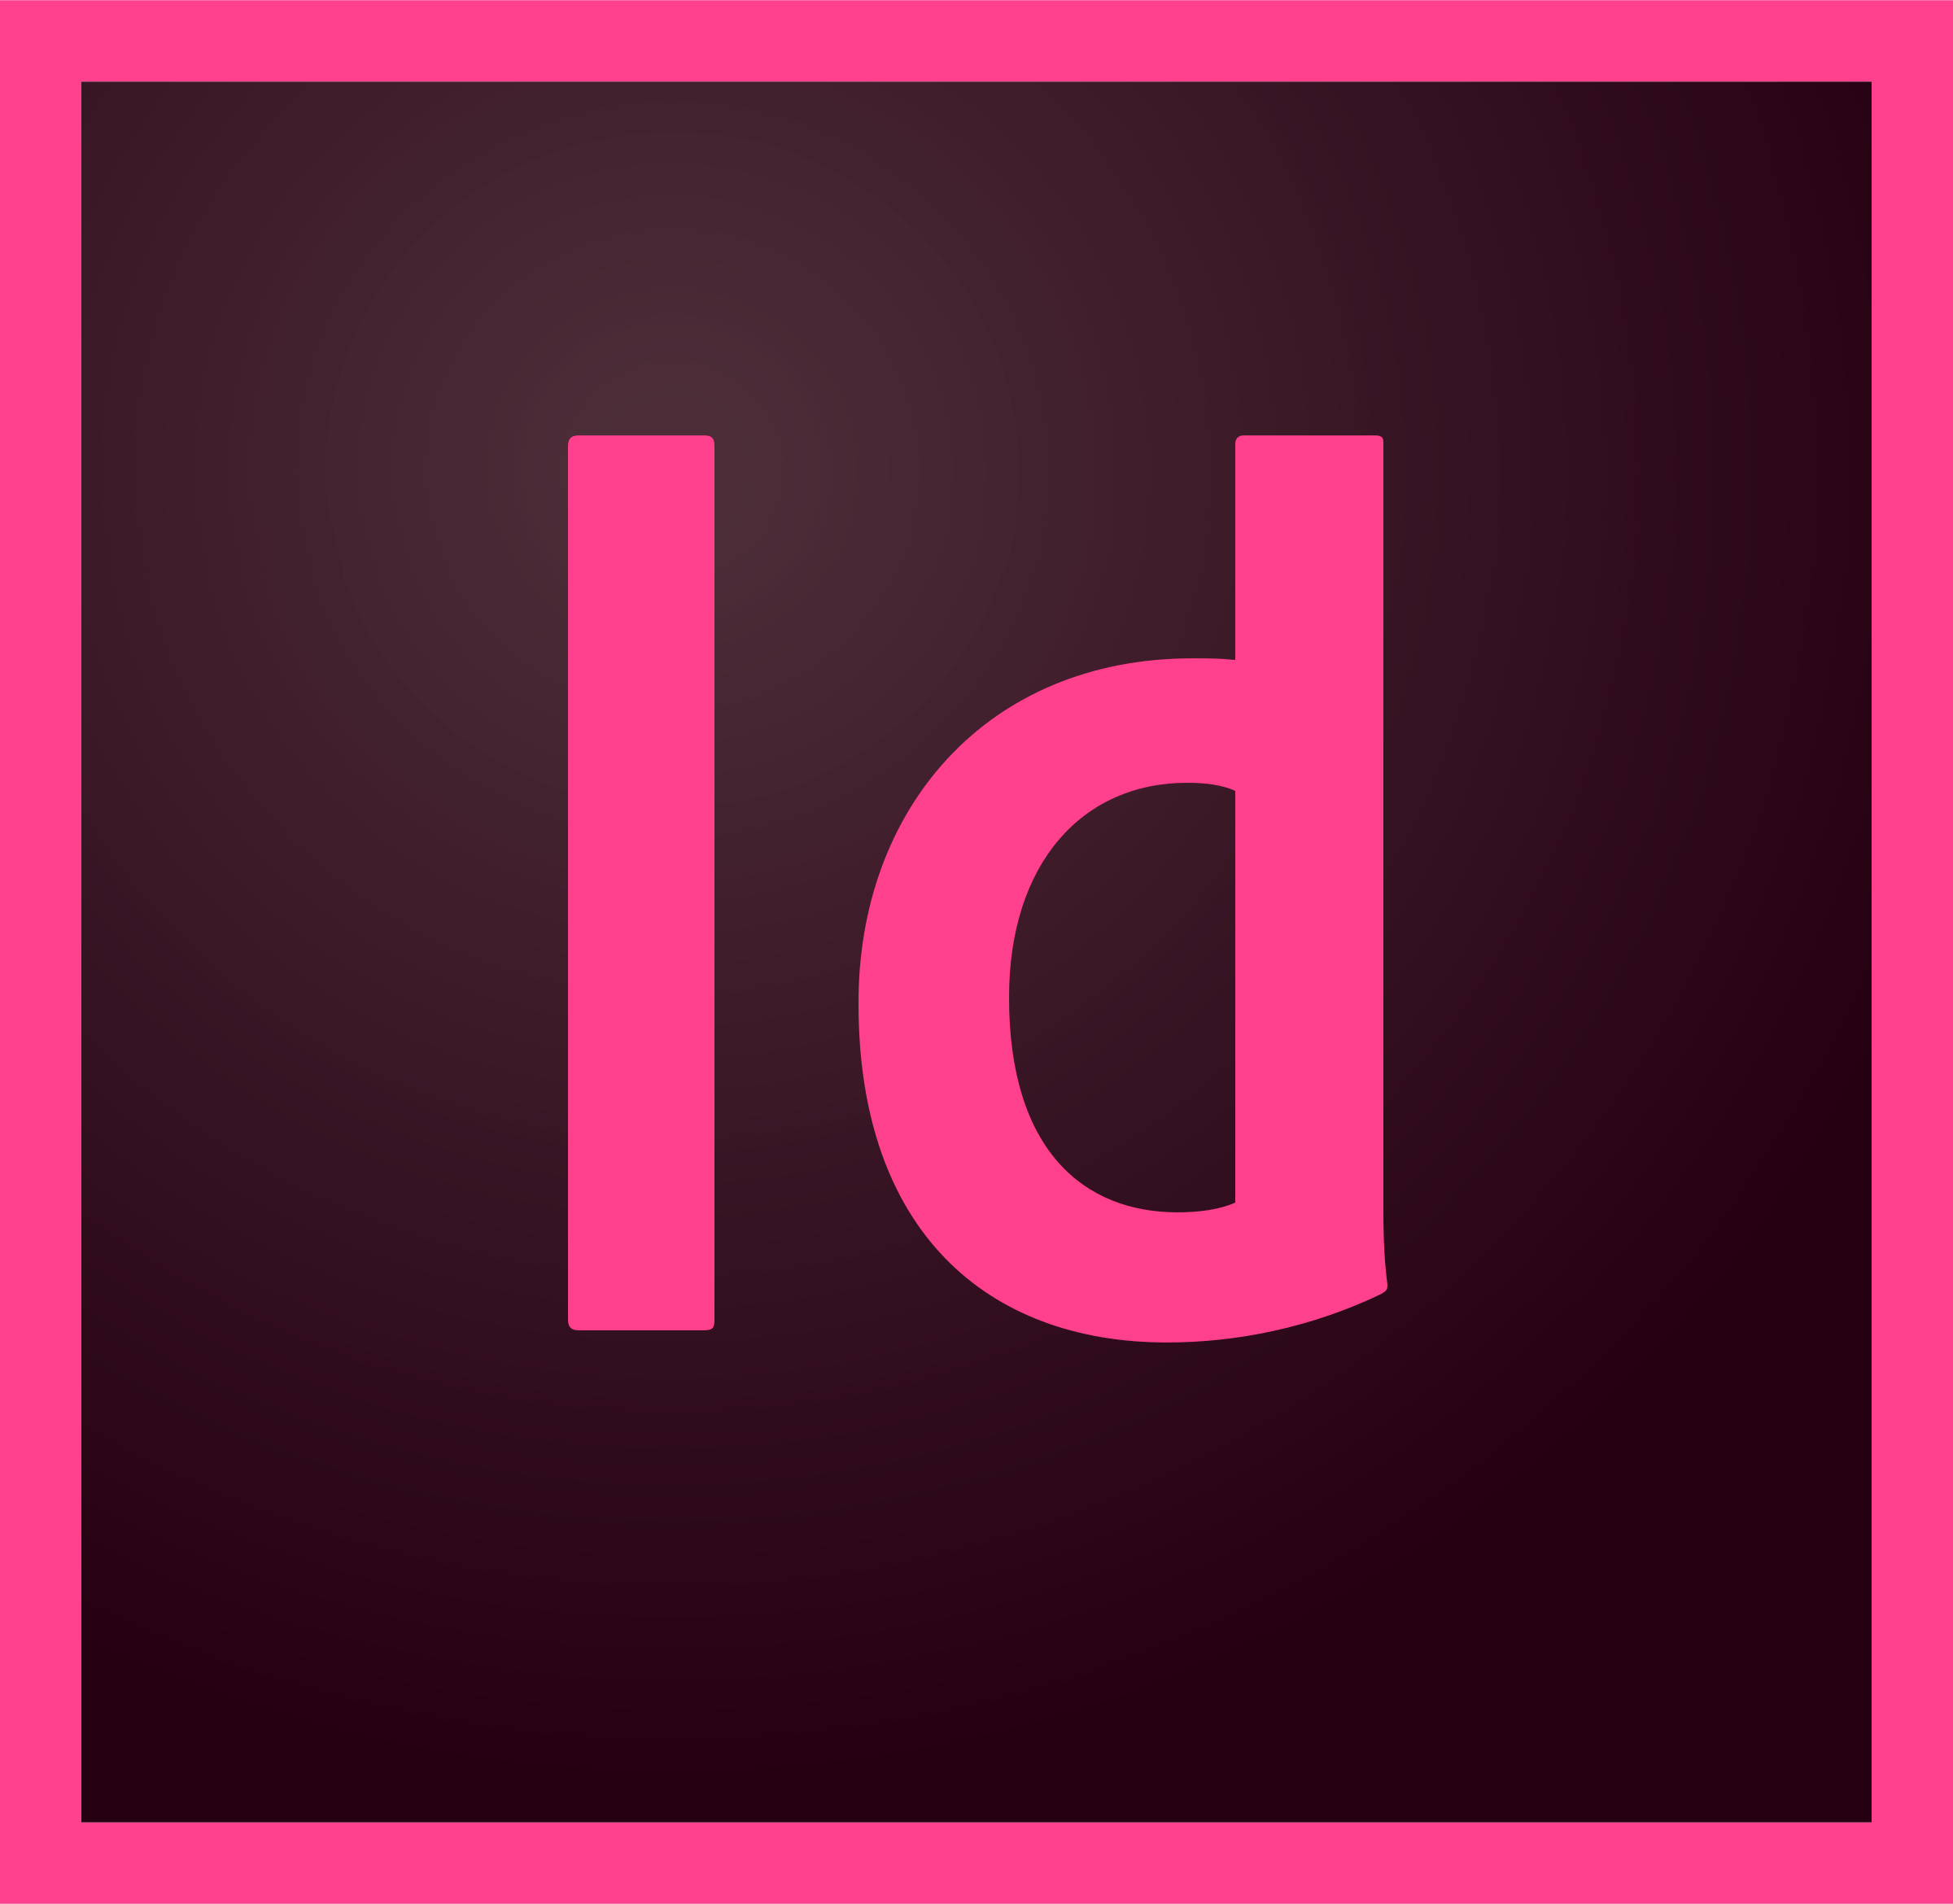 9 Best Adobe InDesign Tutorials and Courses - [2021 Edition]